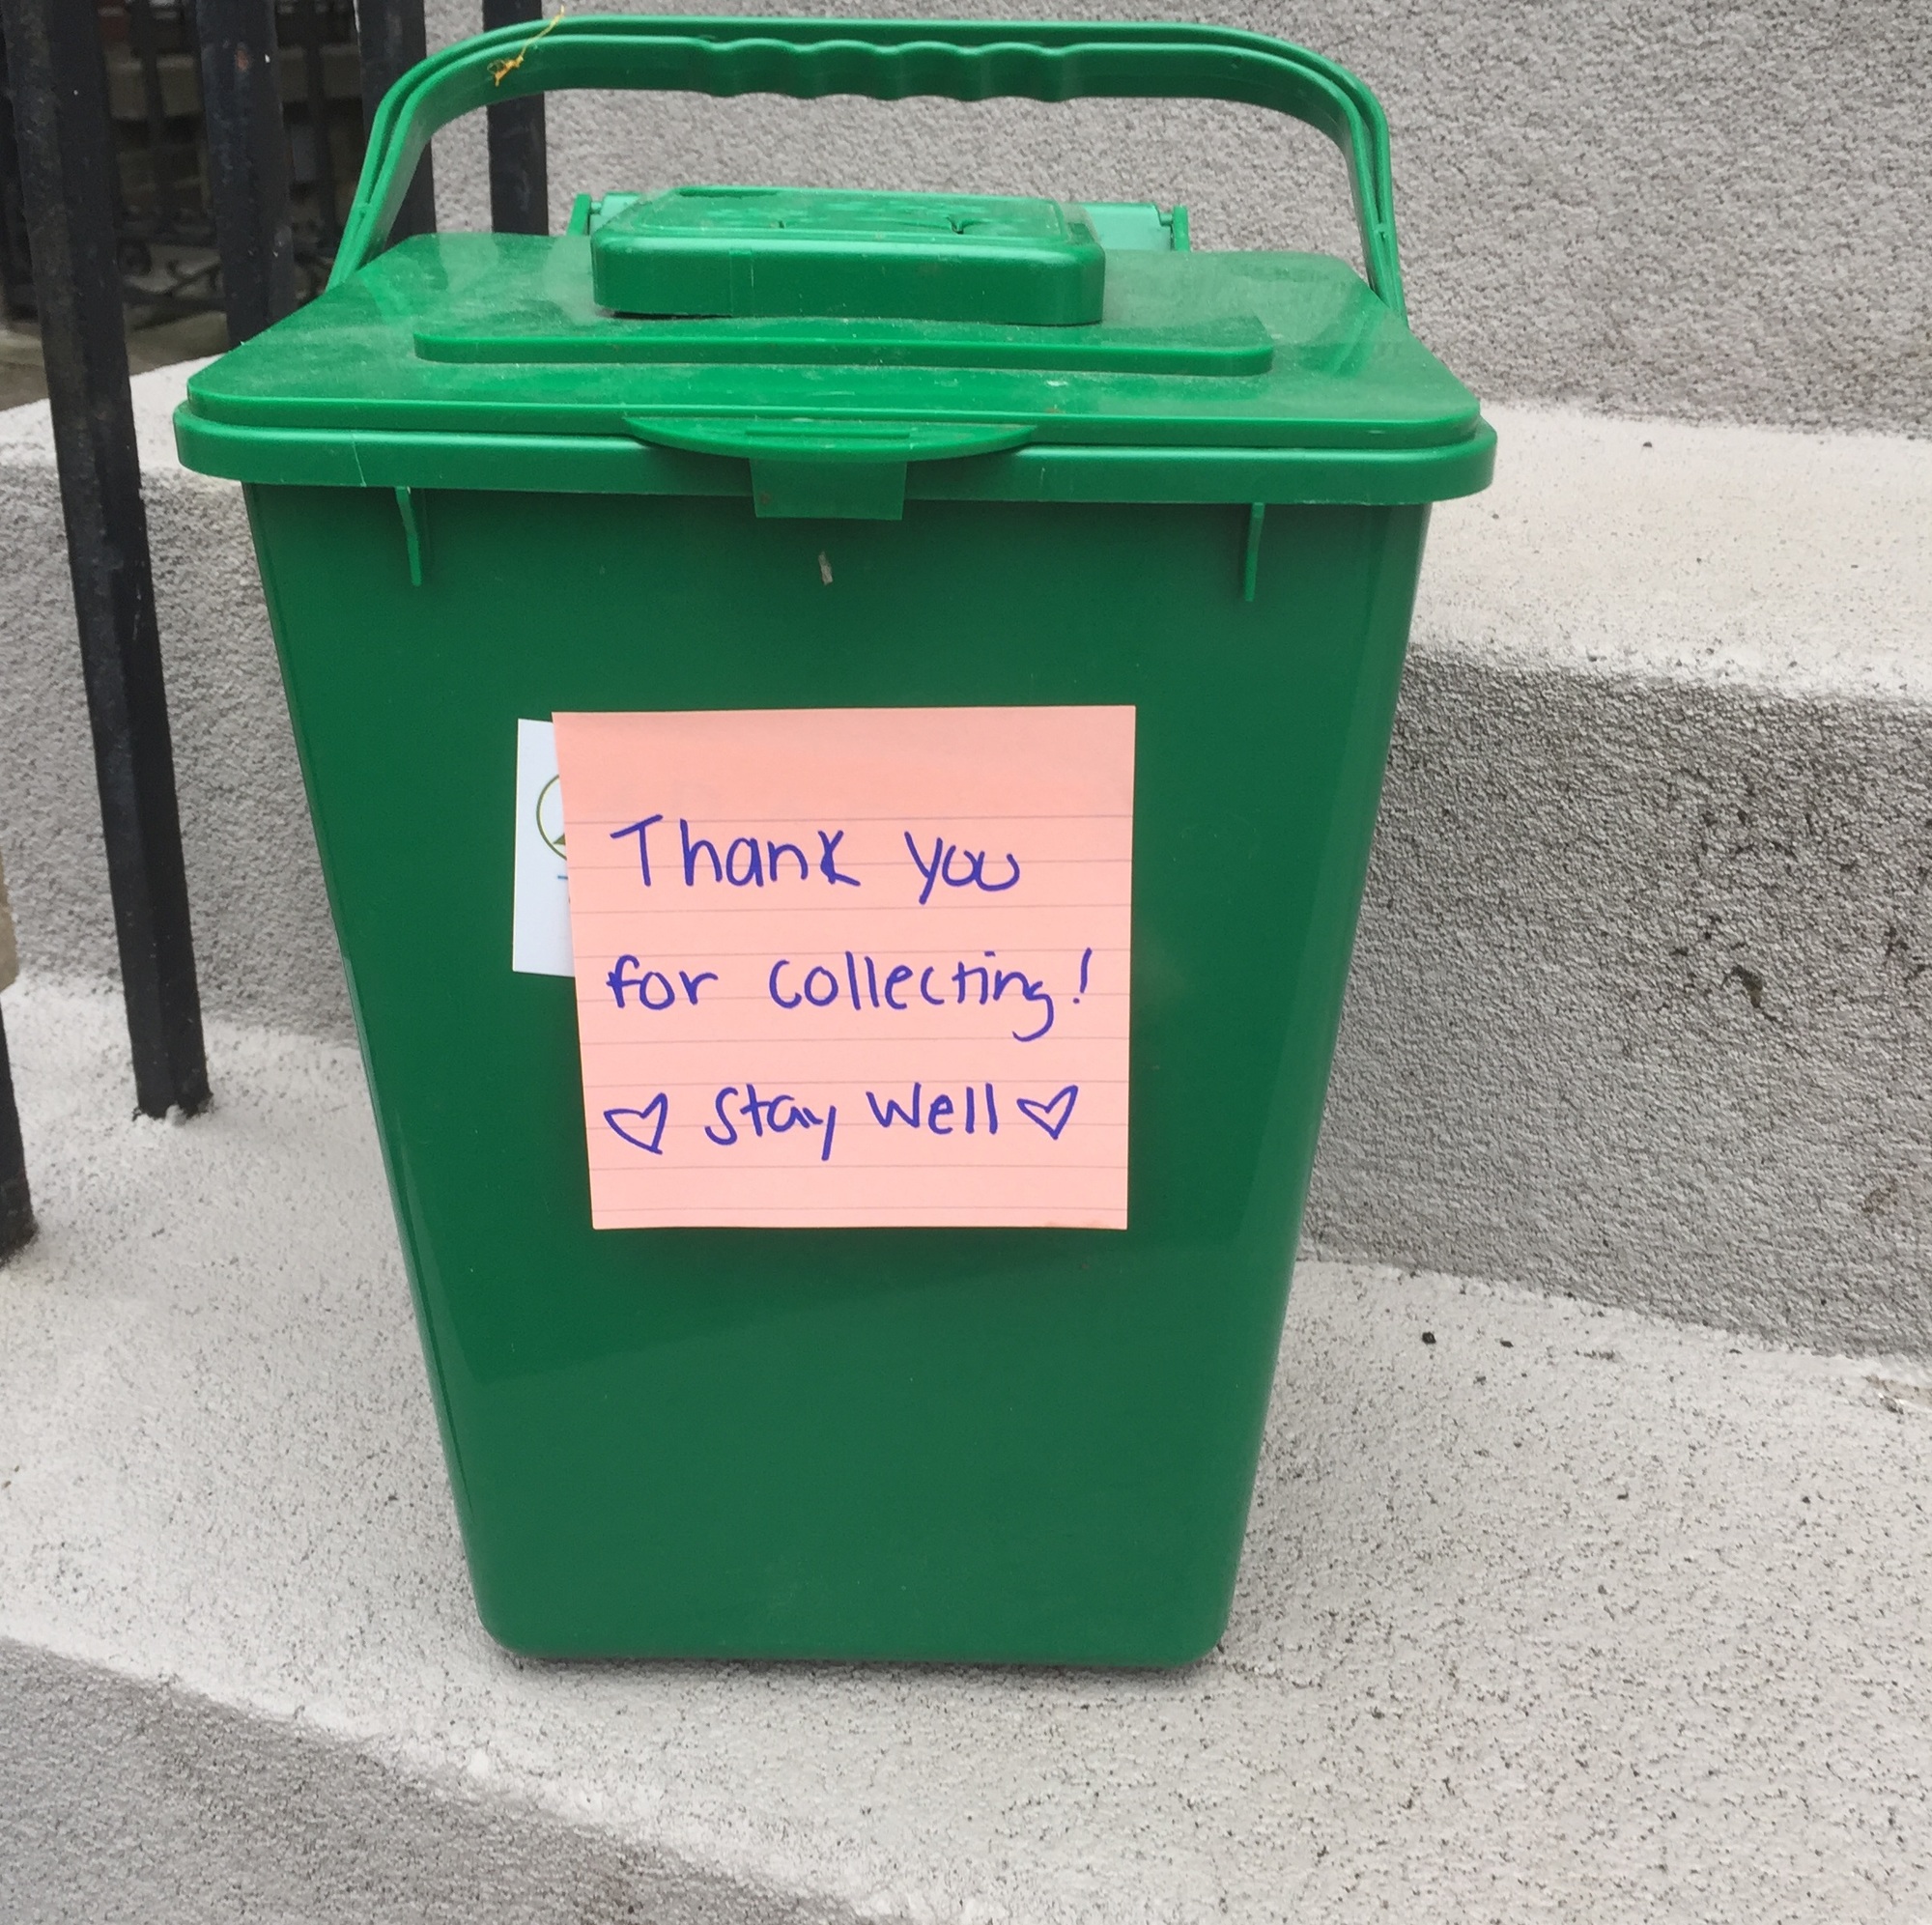 Stay Well Note on Compost Bin